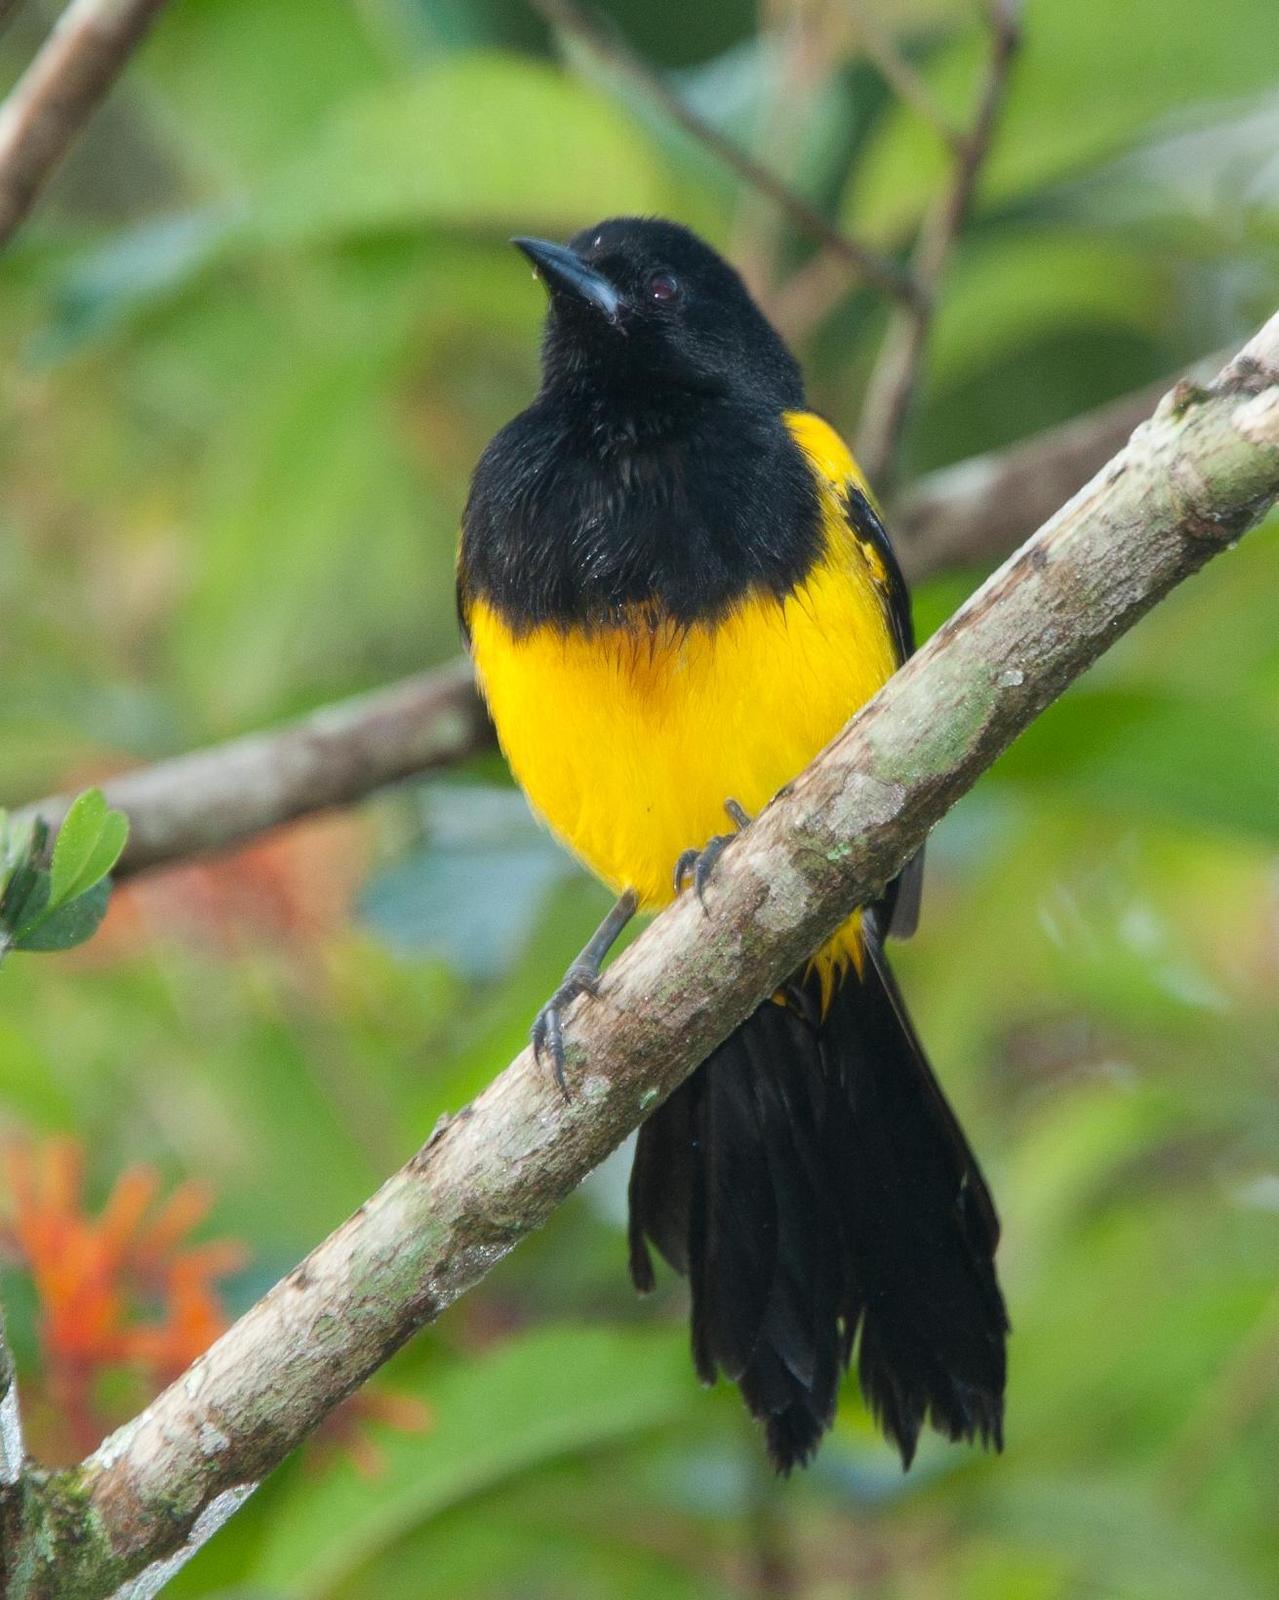 Black-cowled Oriole Photo by Robert Lewis